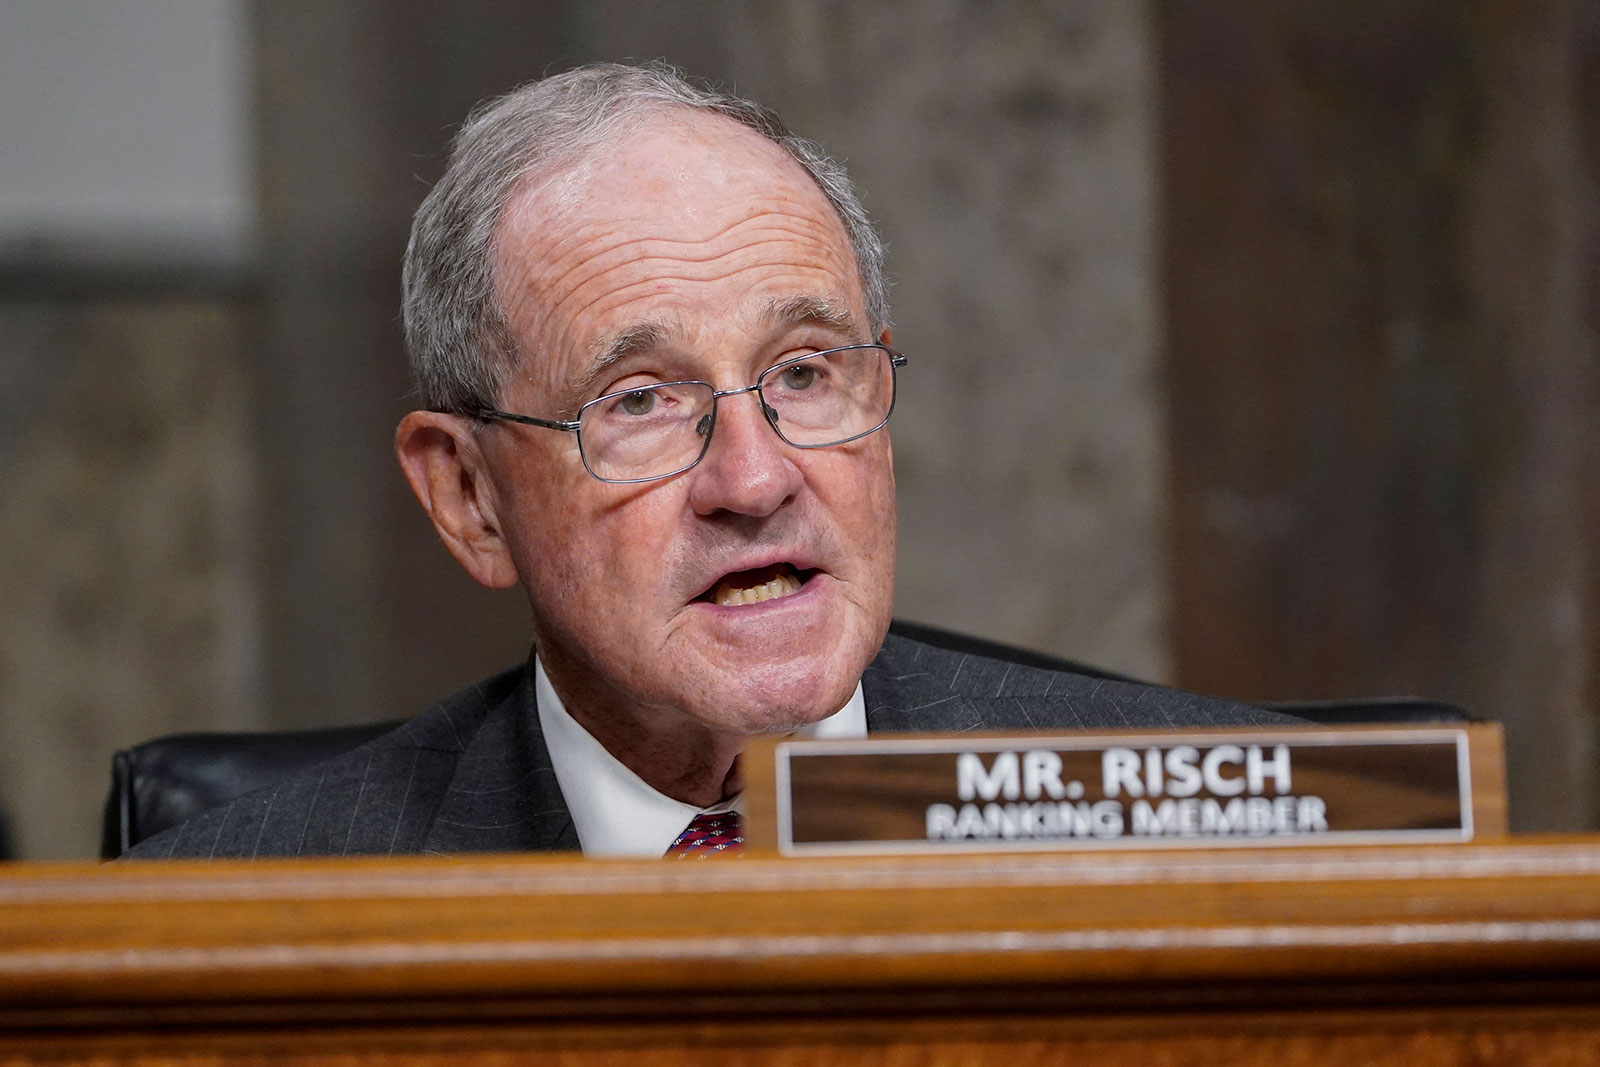 Sen. Jim Risch speaks at a US Senate Foreign Relations Committee hearing on Capitol Hill in Washington in April 2021.